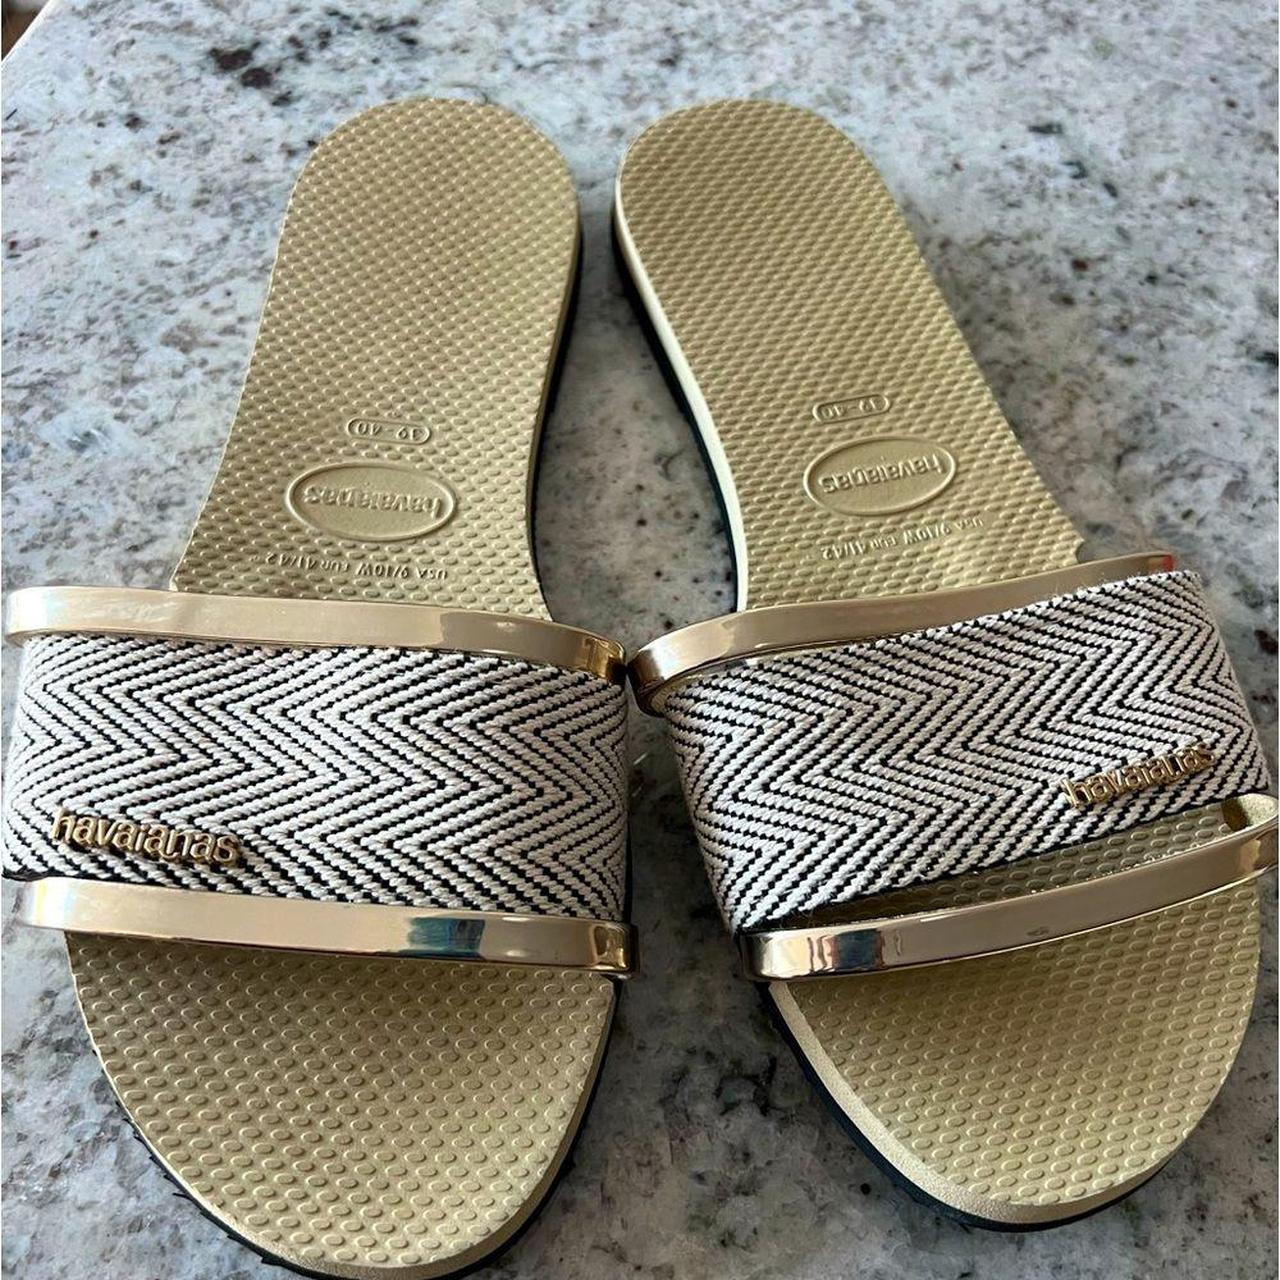 Havaianas Women's Tan and Gold Sandals